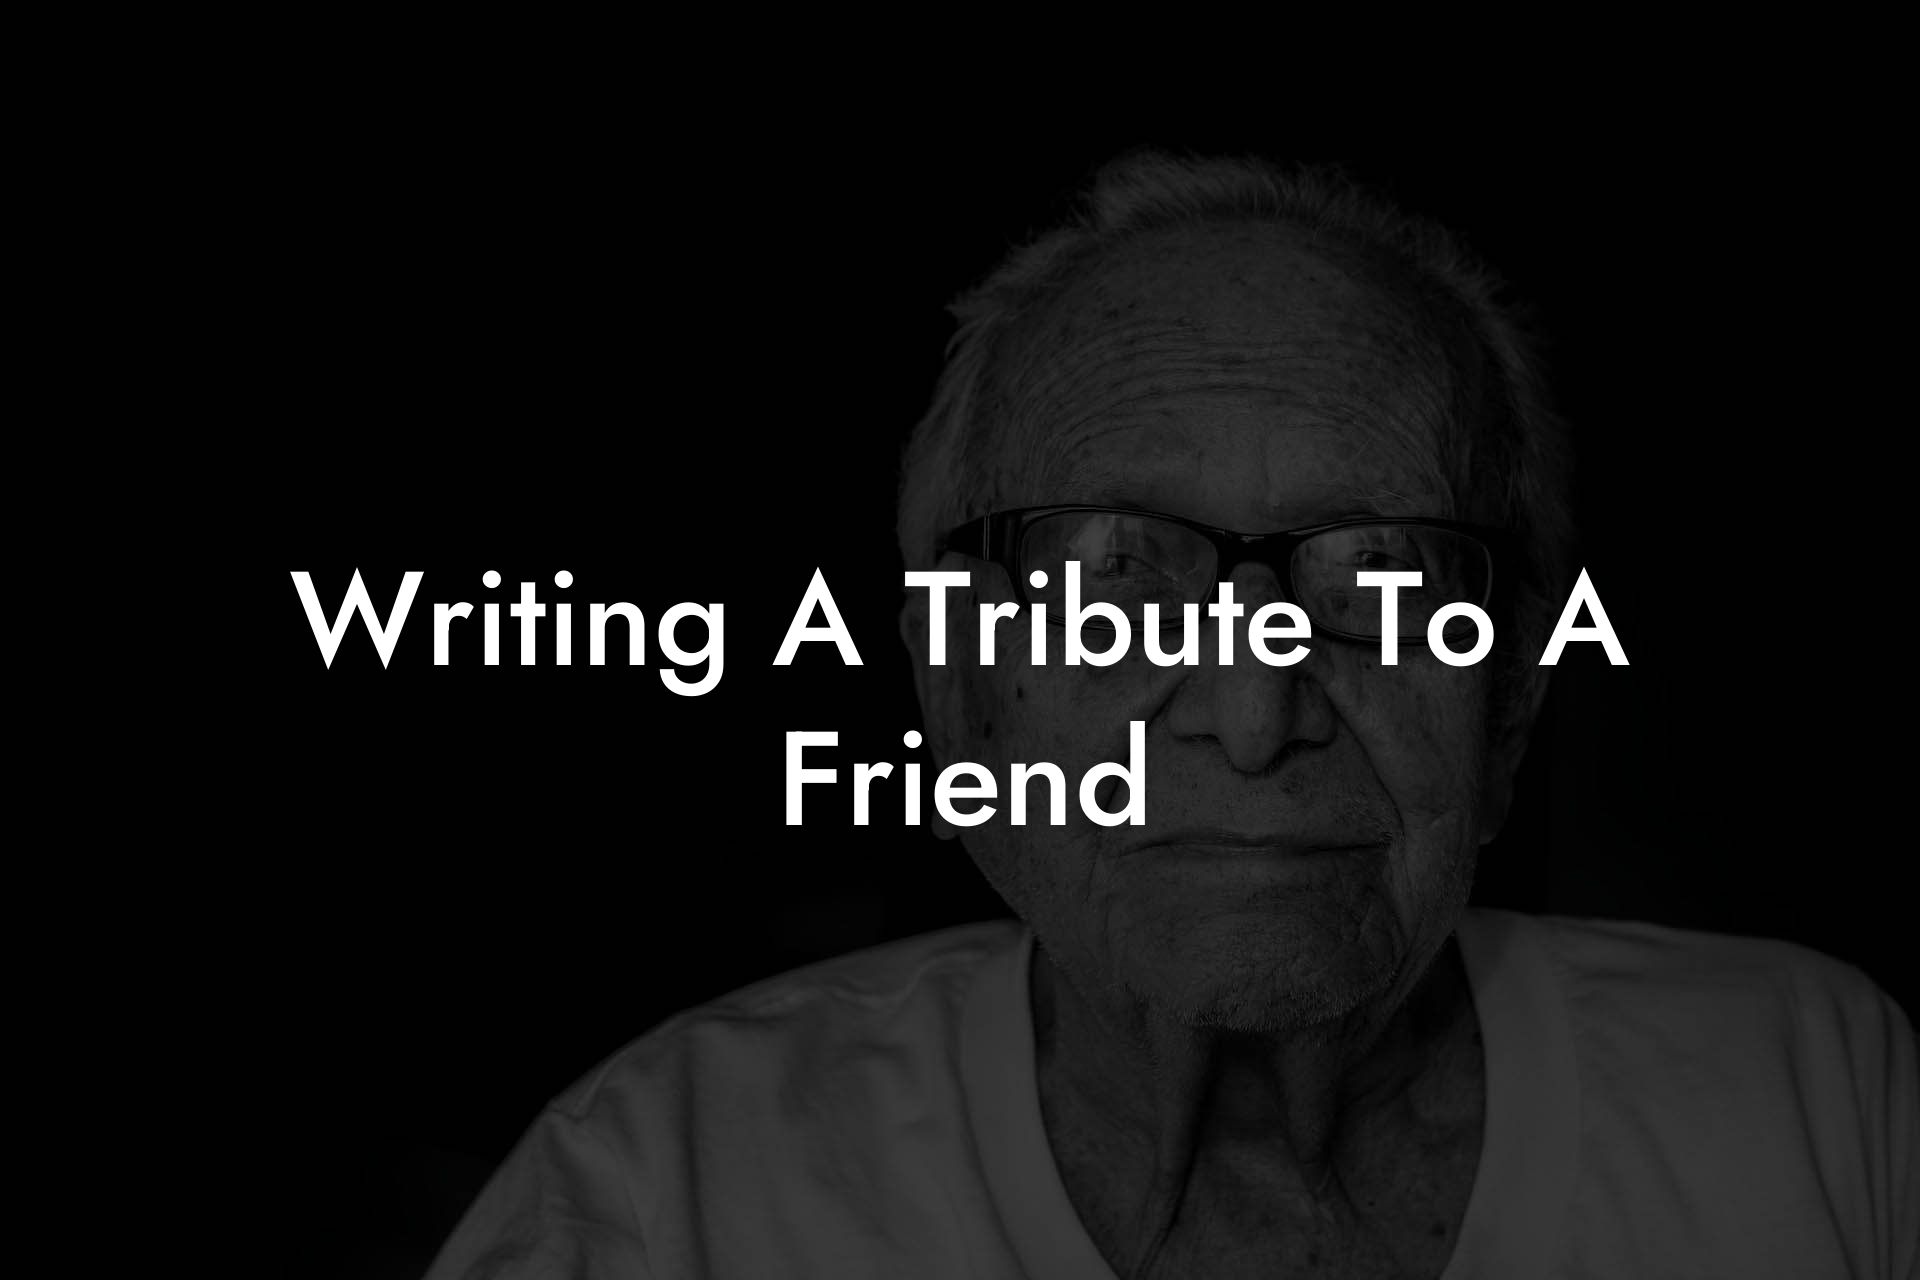 Writing A Tribute To A Friend